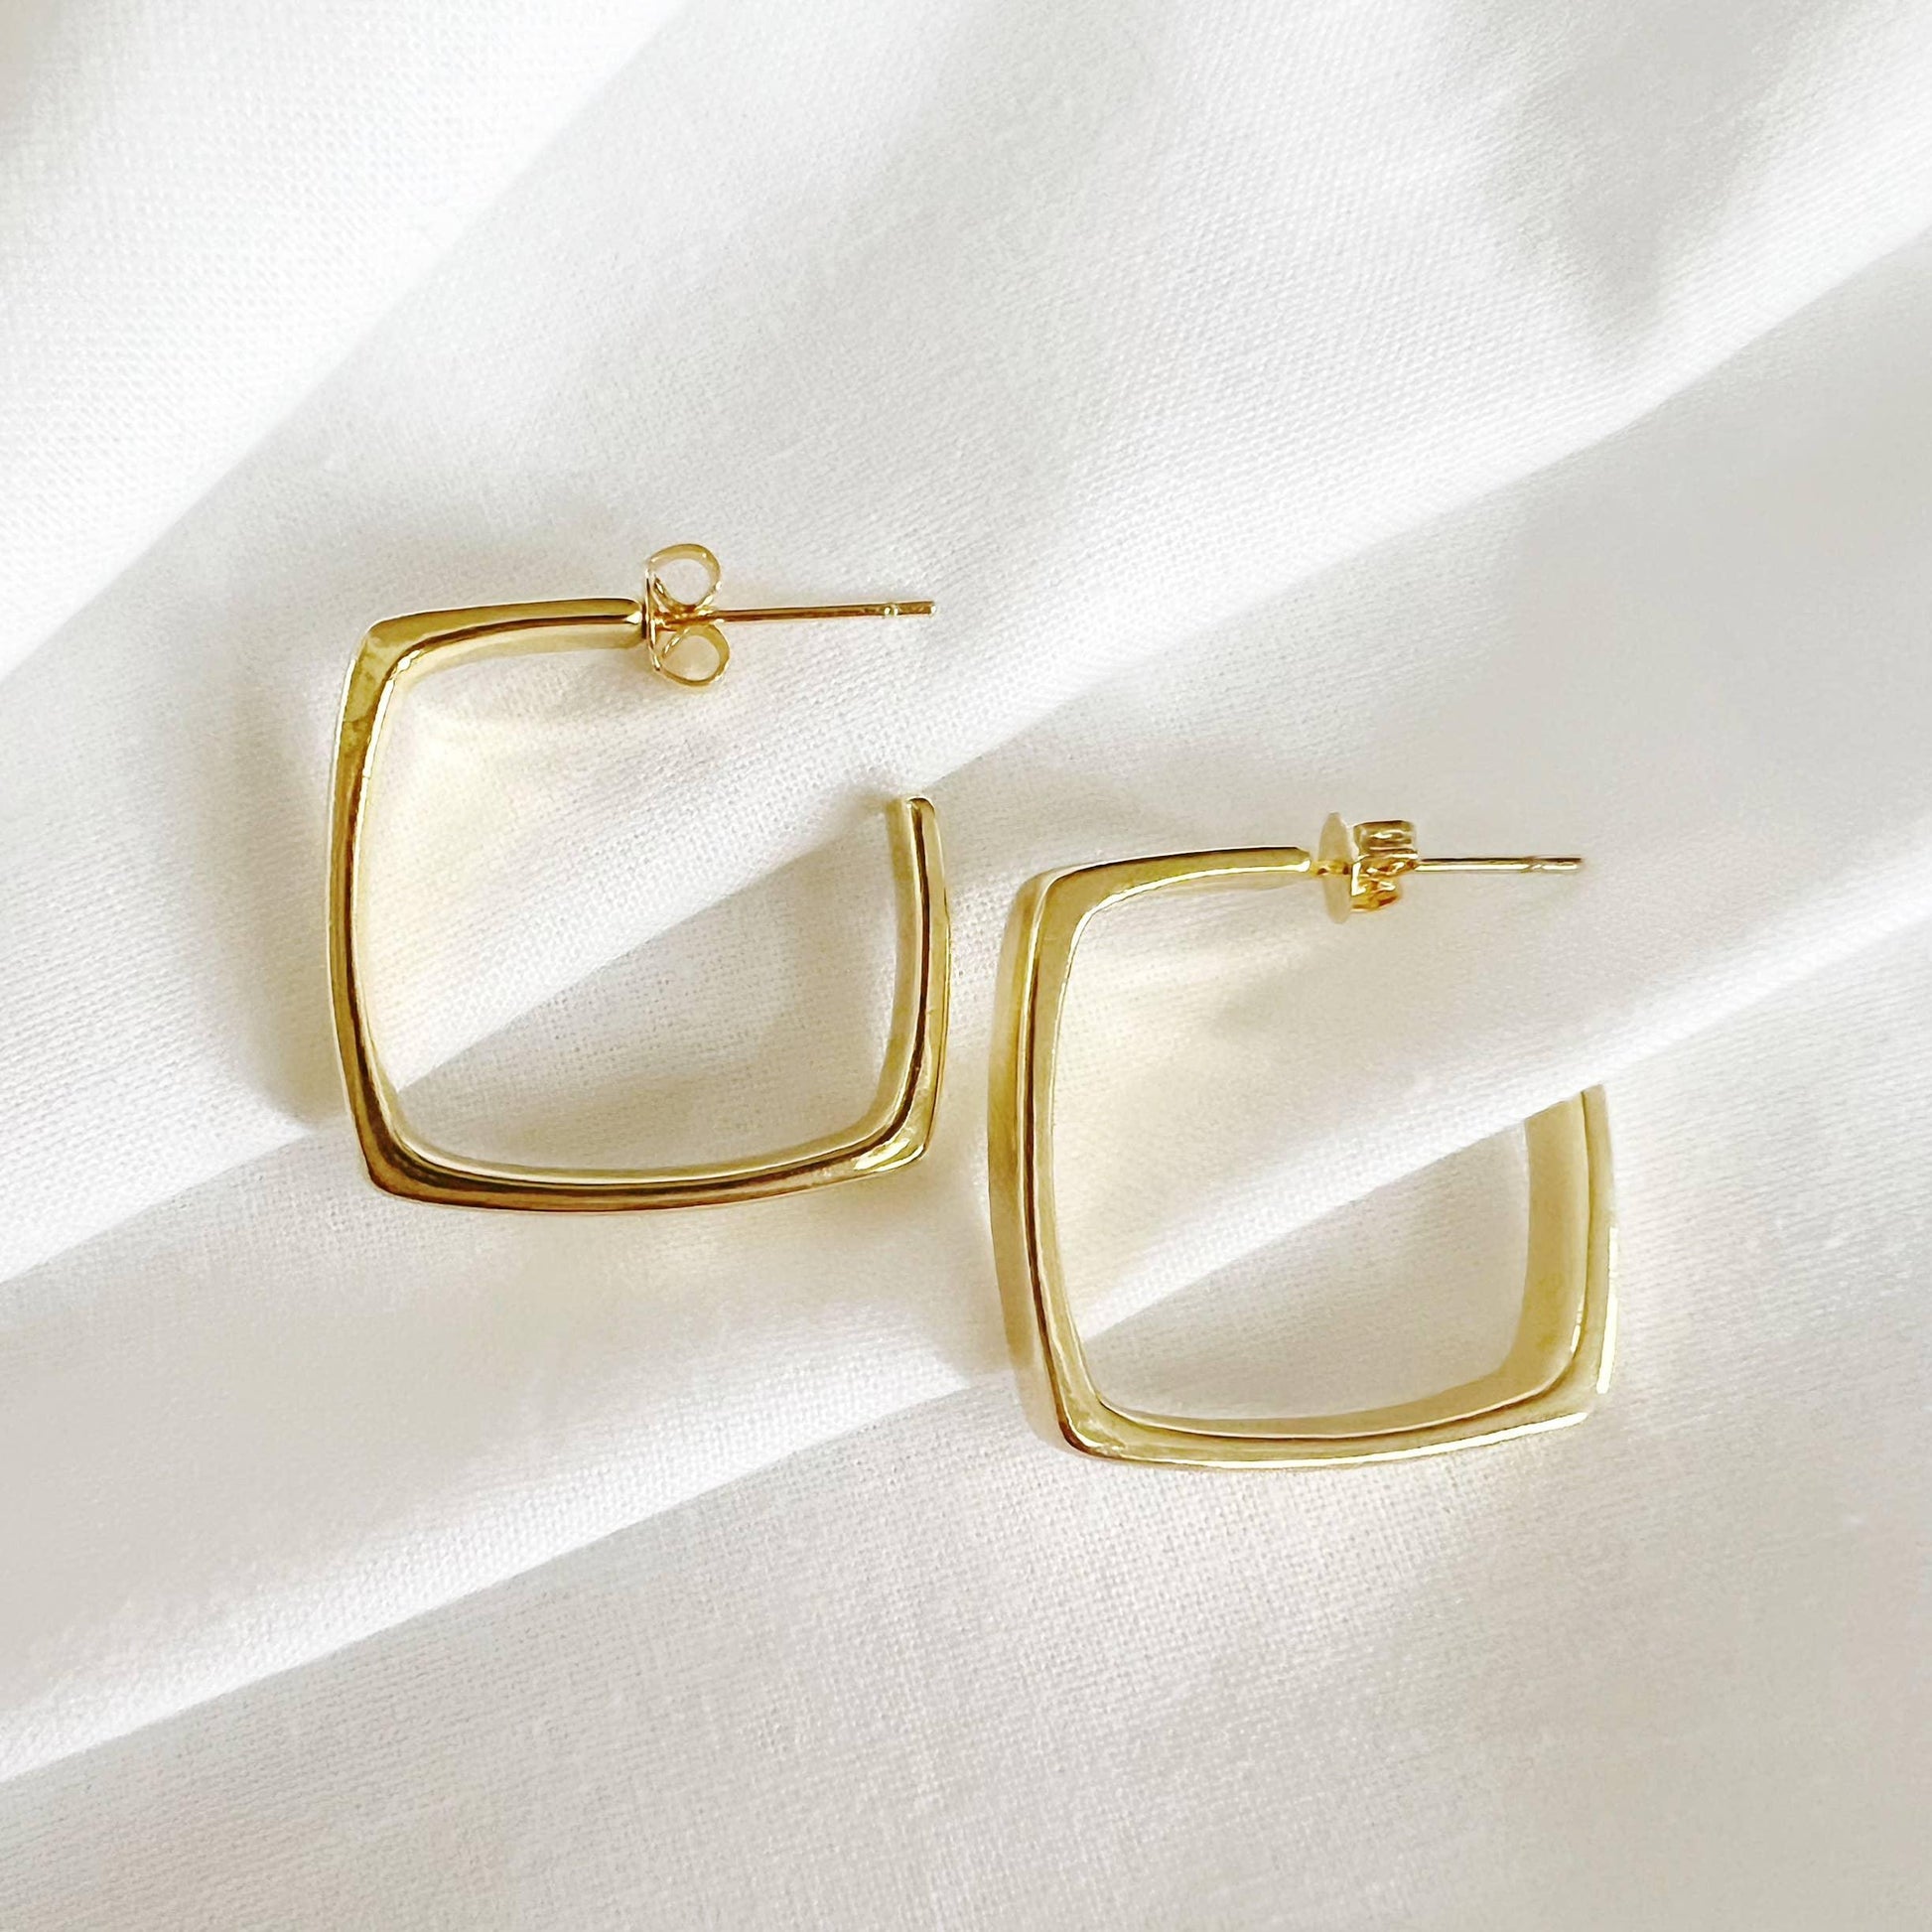 Aries Geometric Hoops Earrings Gold Filled - The Silver Dahlia